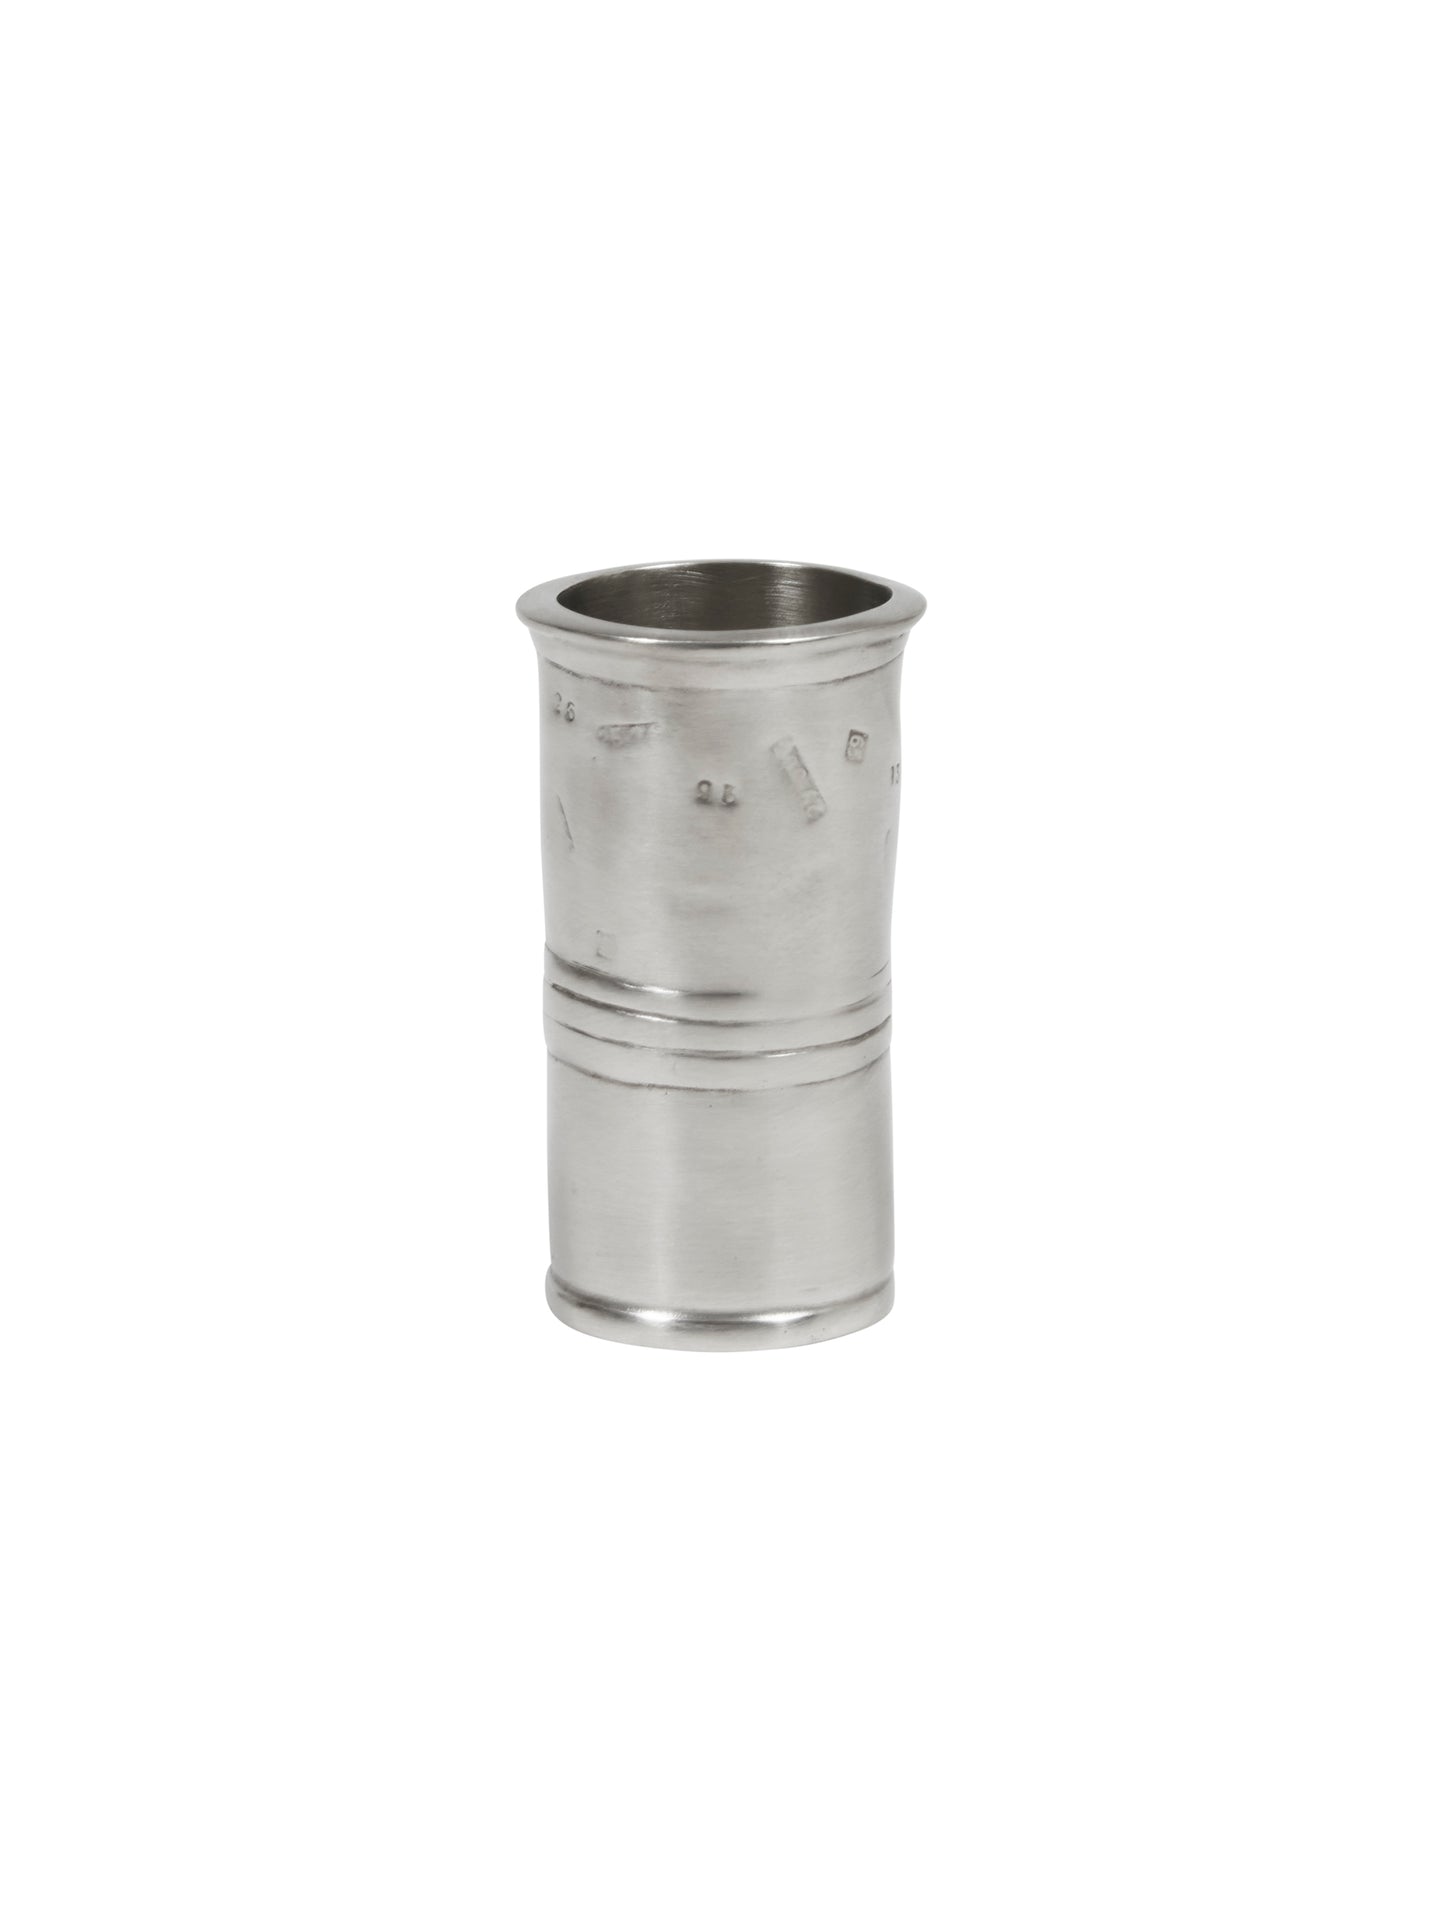 MATCH Pewter Measuring Beaker 3.4 Ounce Weston Table